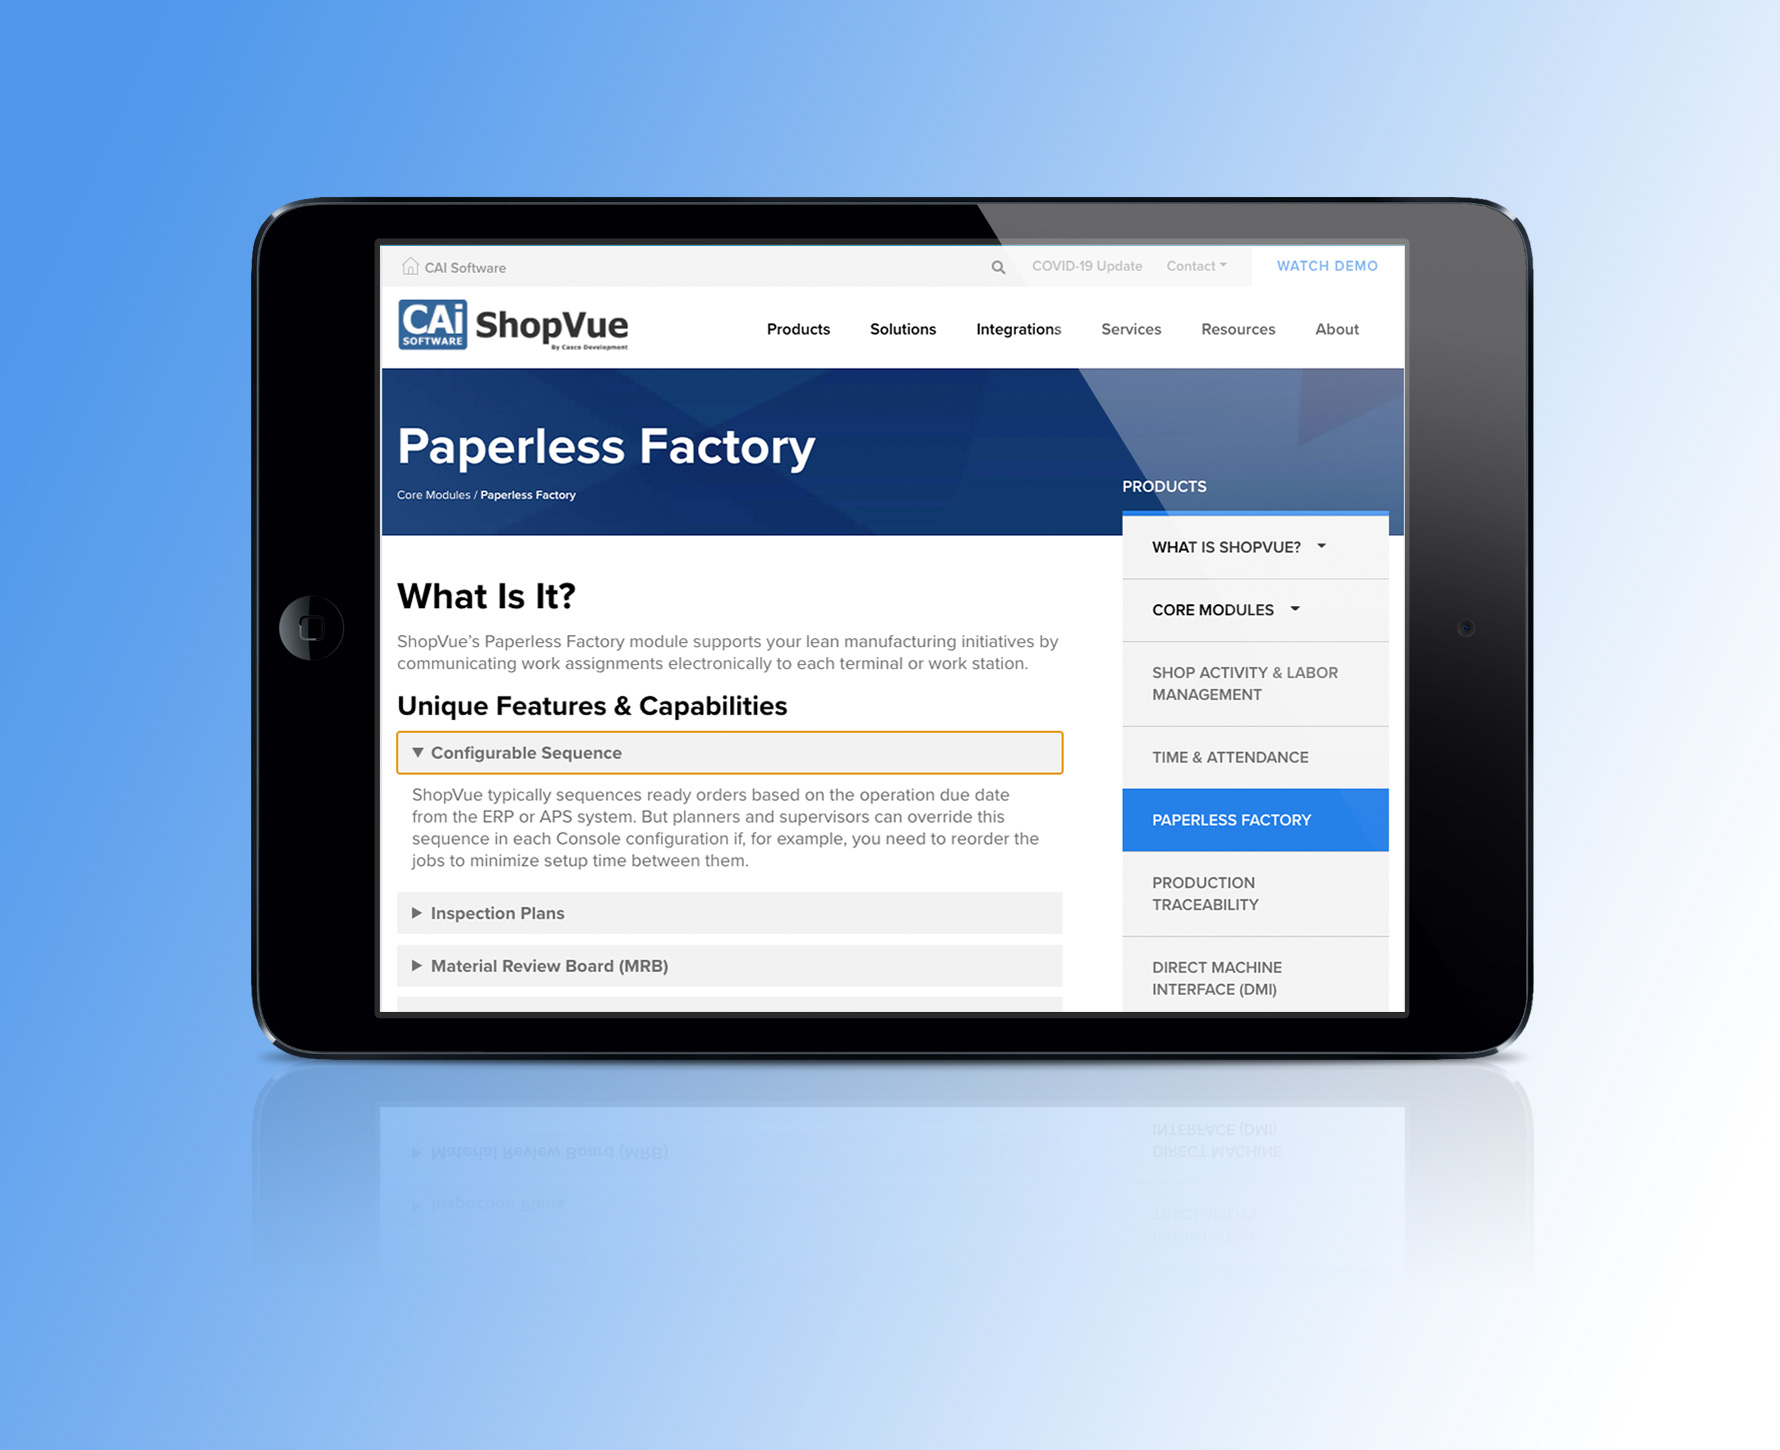 Cai Shopvue paperless factory page featured on a black tablet